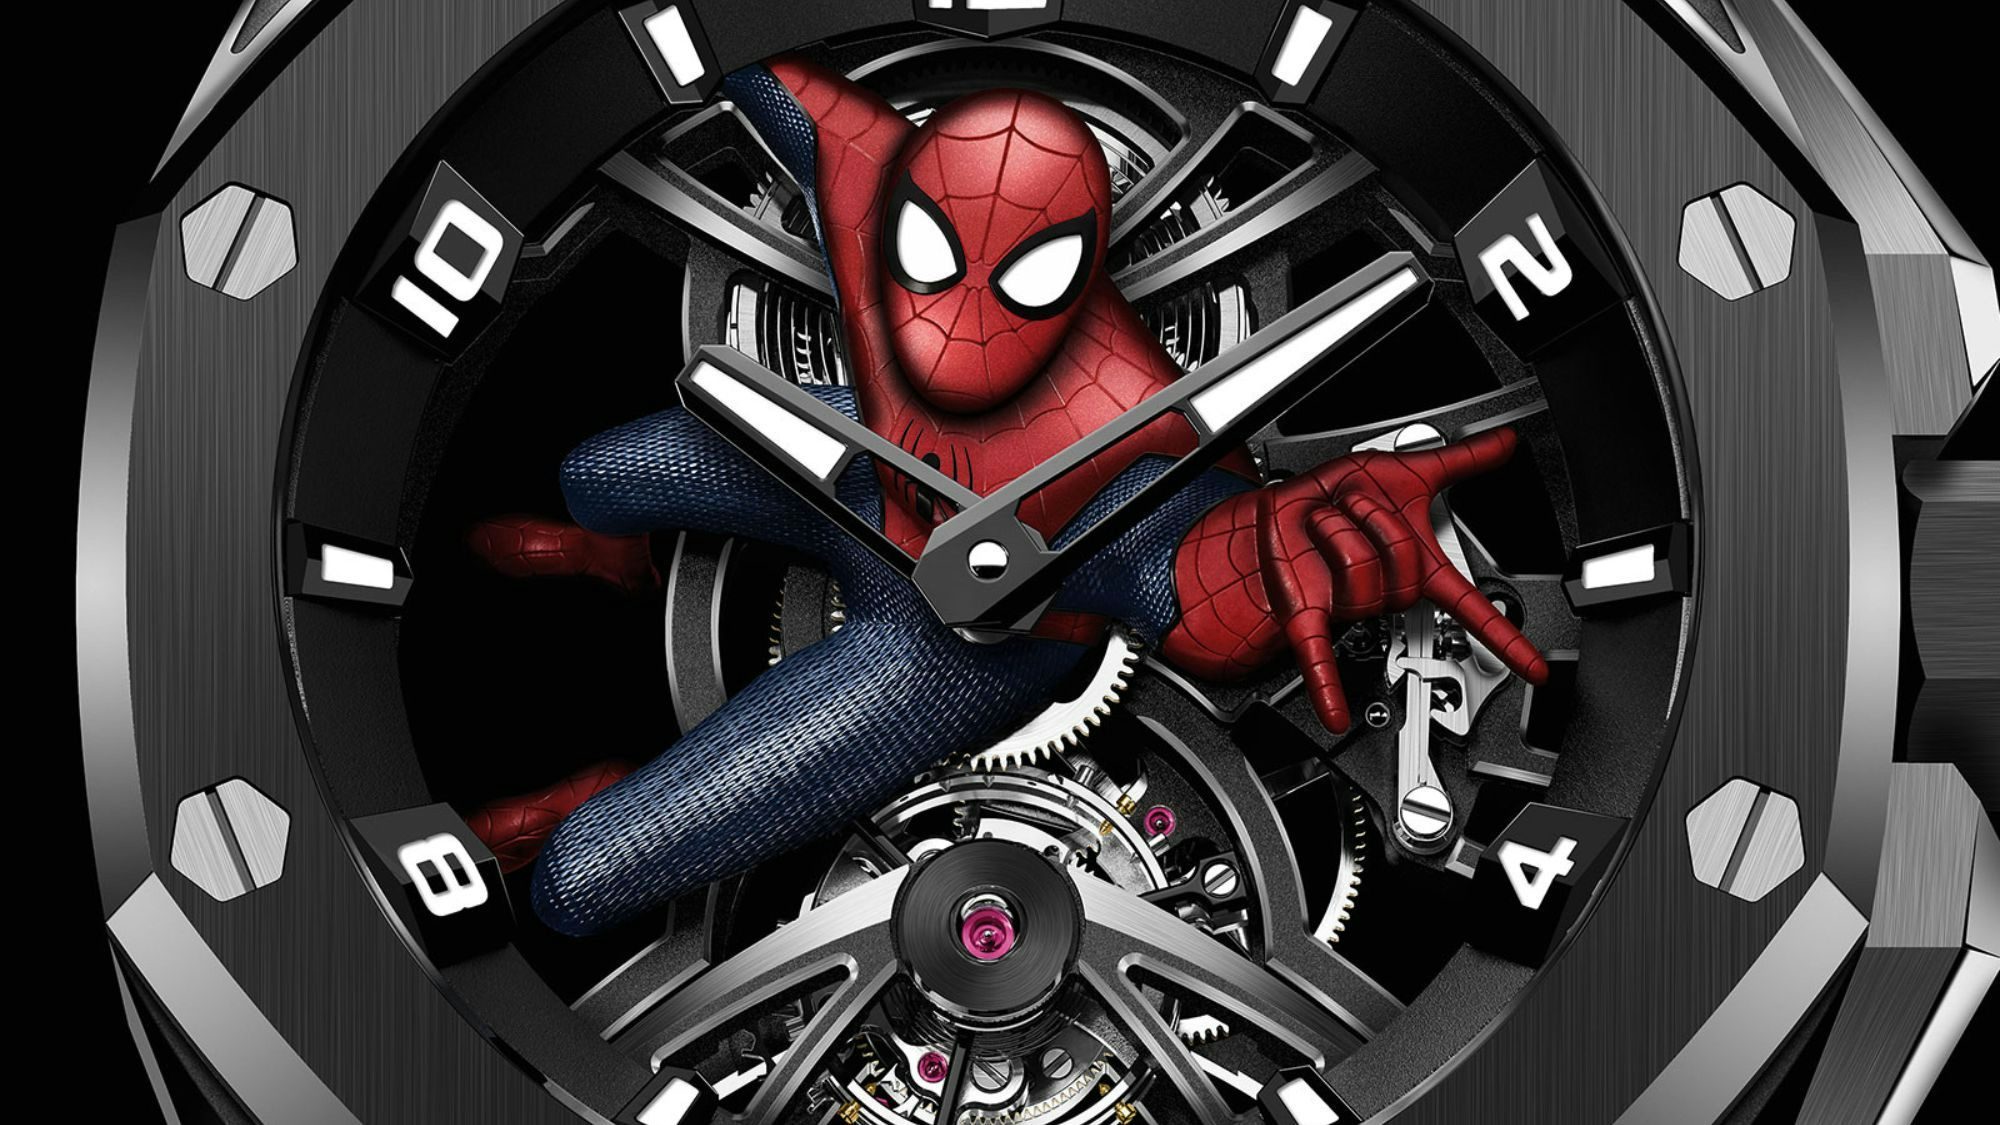 Audemars Piguet's $6.2 Million Spider-Man Watch, Jacquemus x Nike JF1s, And More: Global Collabs Of The Week